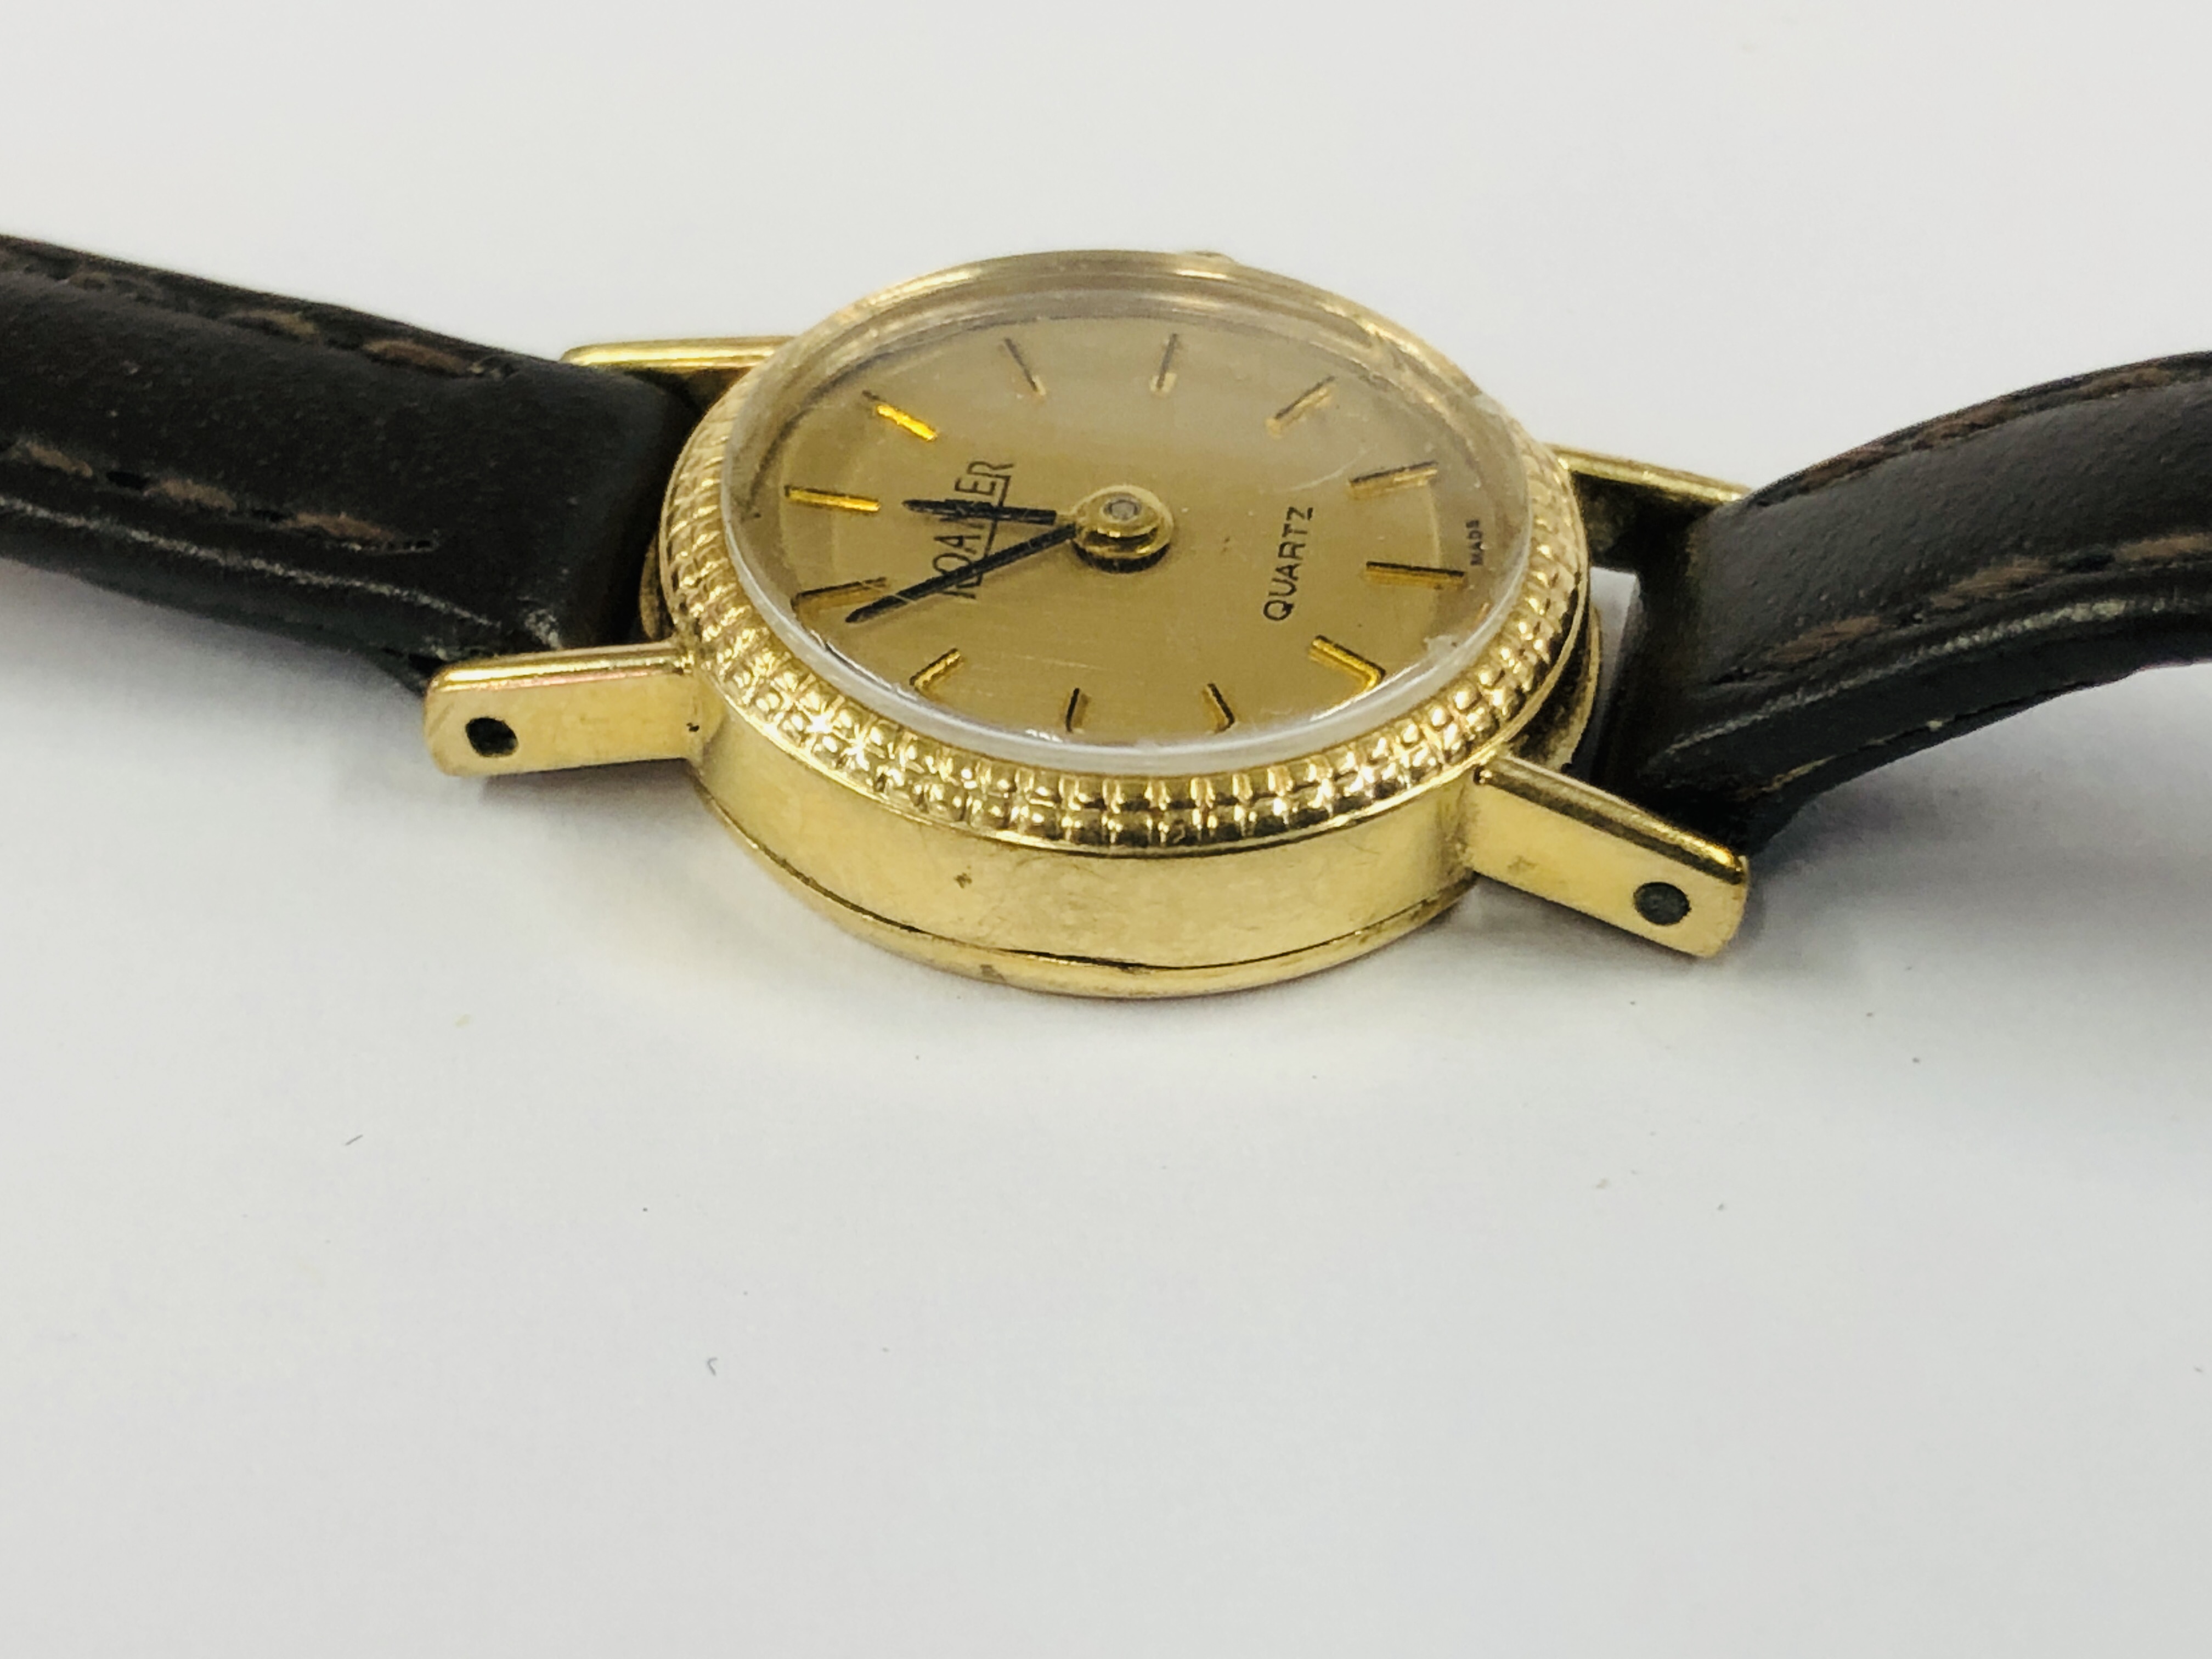 LADIES ROAMER 9CT GOLD CASED WRIST WATCH ON A BROWN LEATHER STRAP. - Image 7 of 12